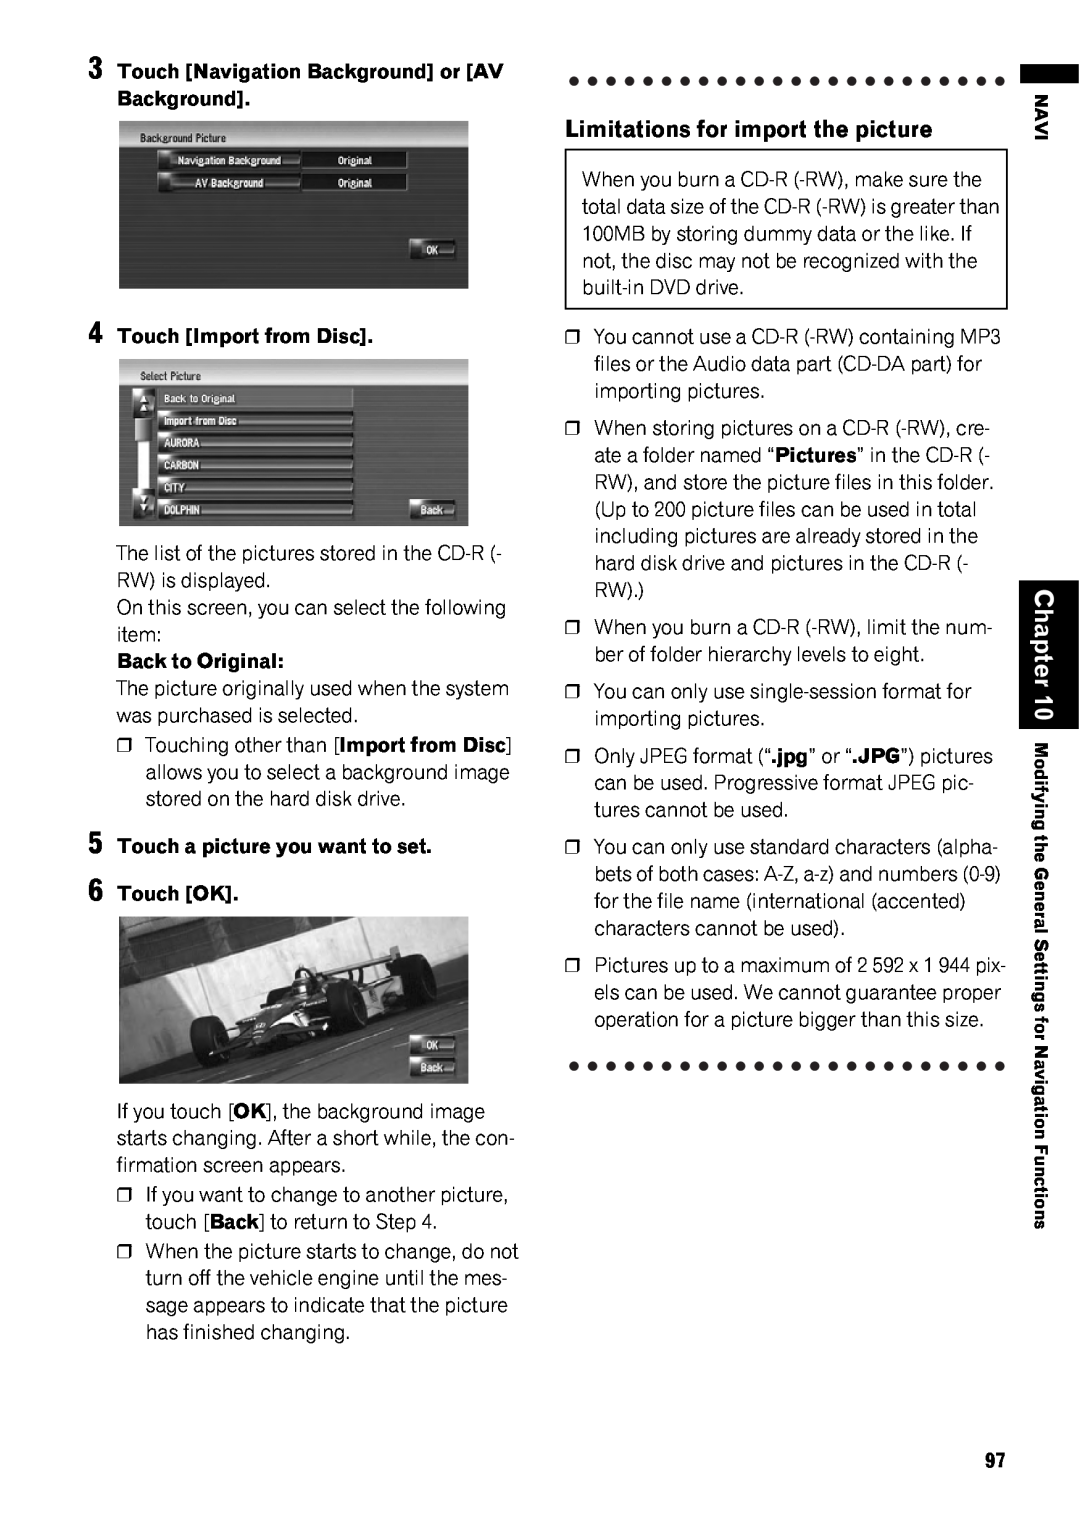 Pioneer AVIC-Z1 operation manual Limitations for import the picture, You cannot use a CD-R -RW containing MP3 